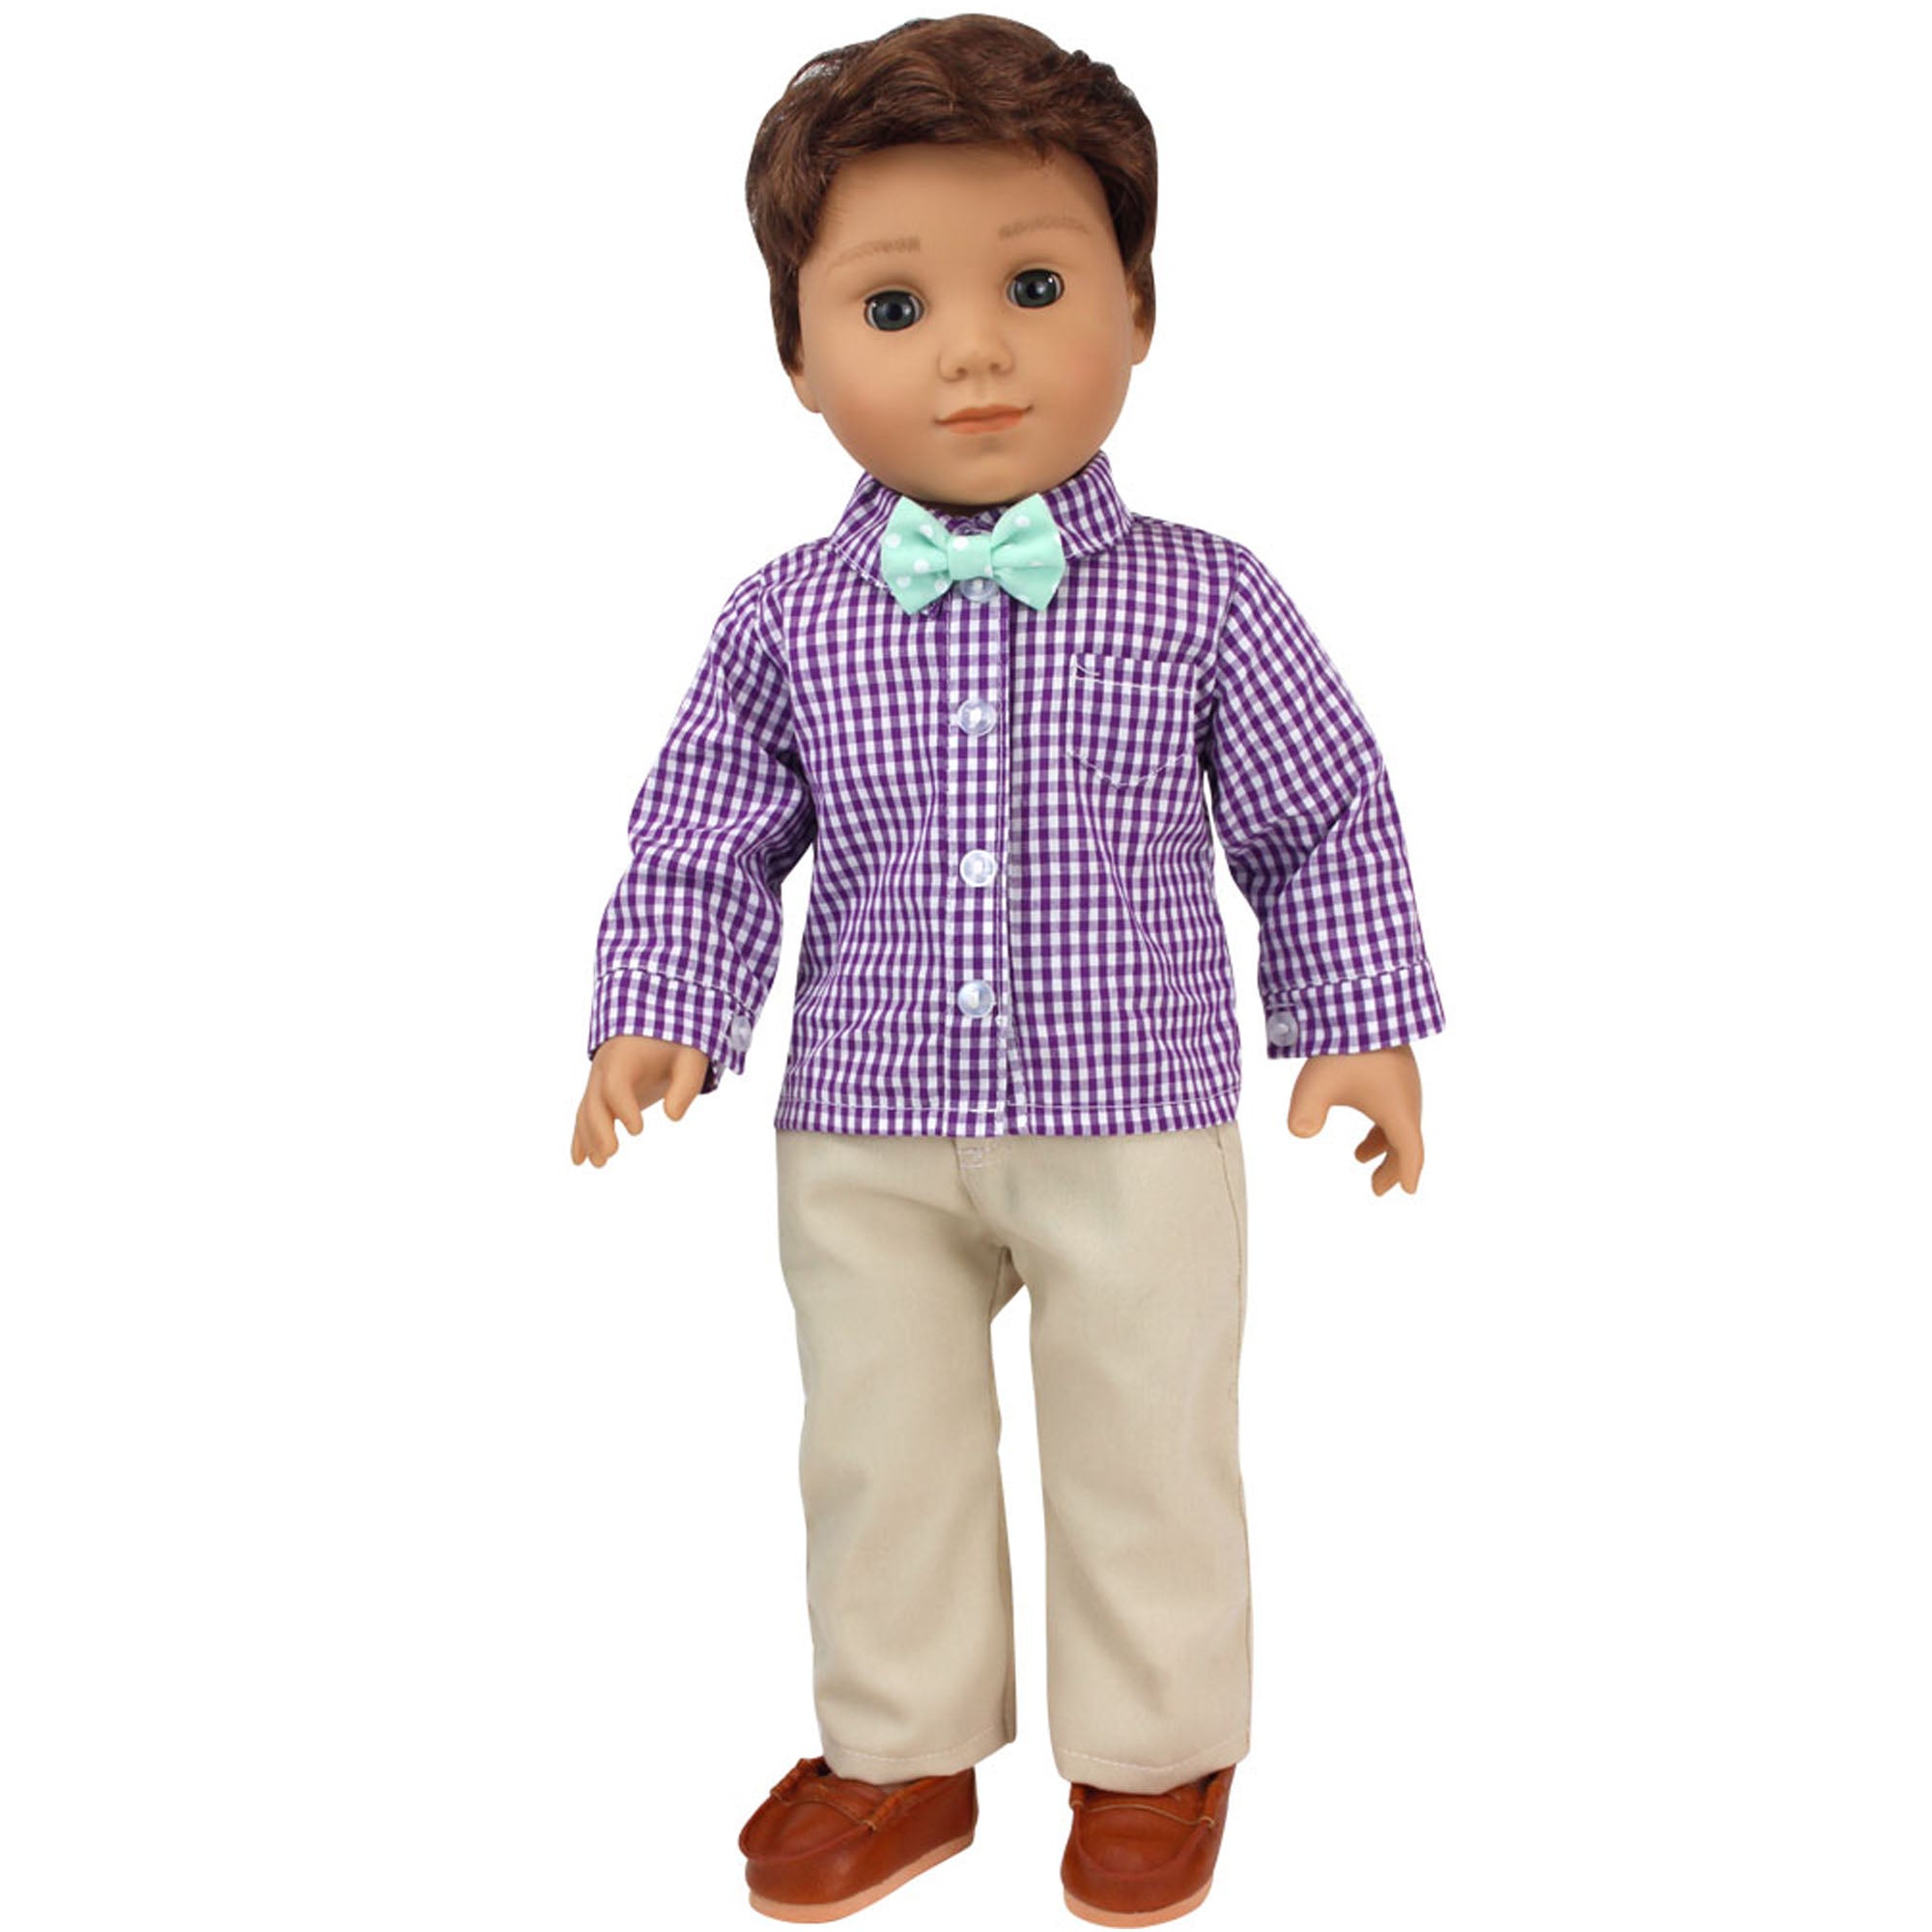 Sophia’s Complete Gender-Neutral Outfit Set with Gingham Shirt, Mint Green Polka Dot Bow Tie, & Khaki Pants for 18” Dolls, Purple